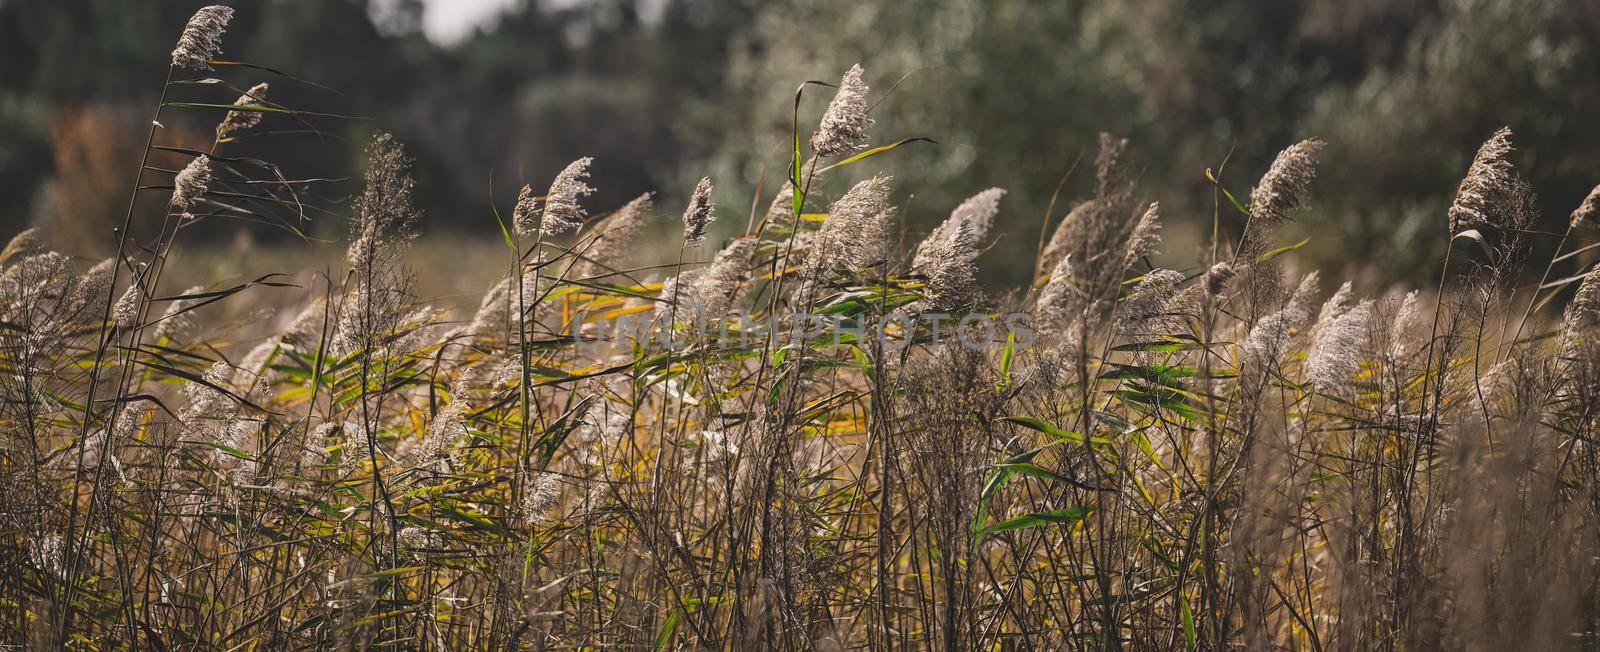 Dry stalks of reeds at the pond sway in the wind on an autumn day by ndanko